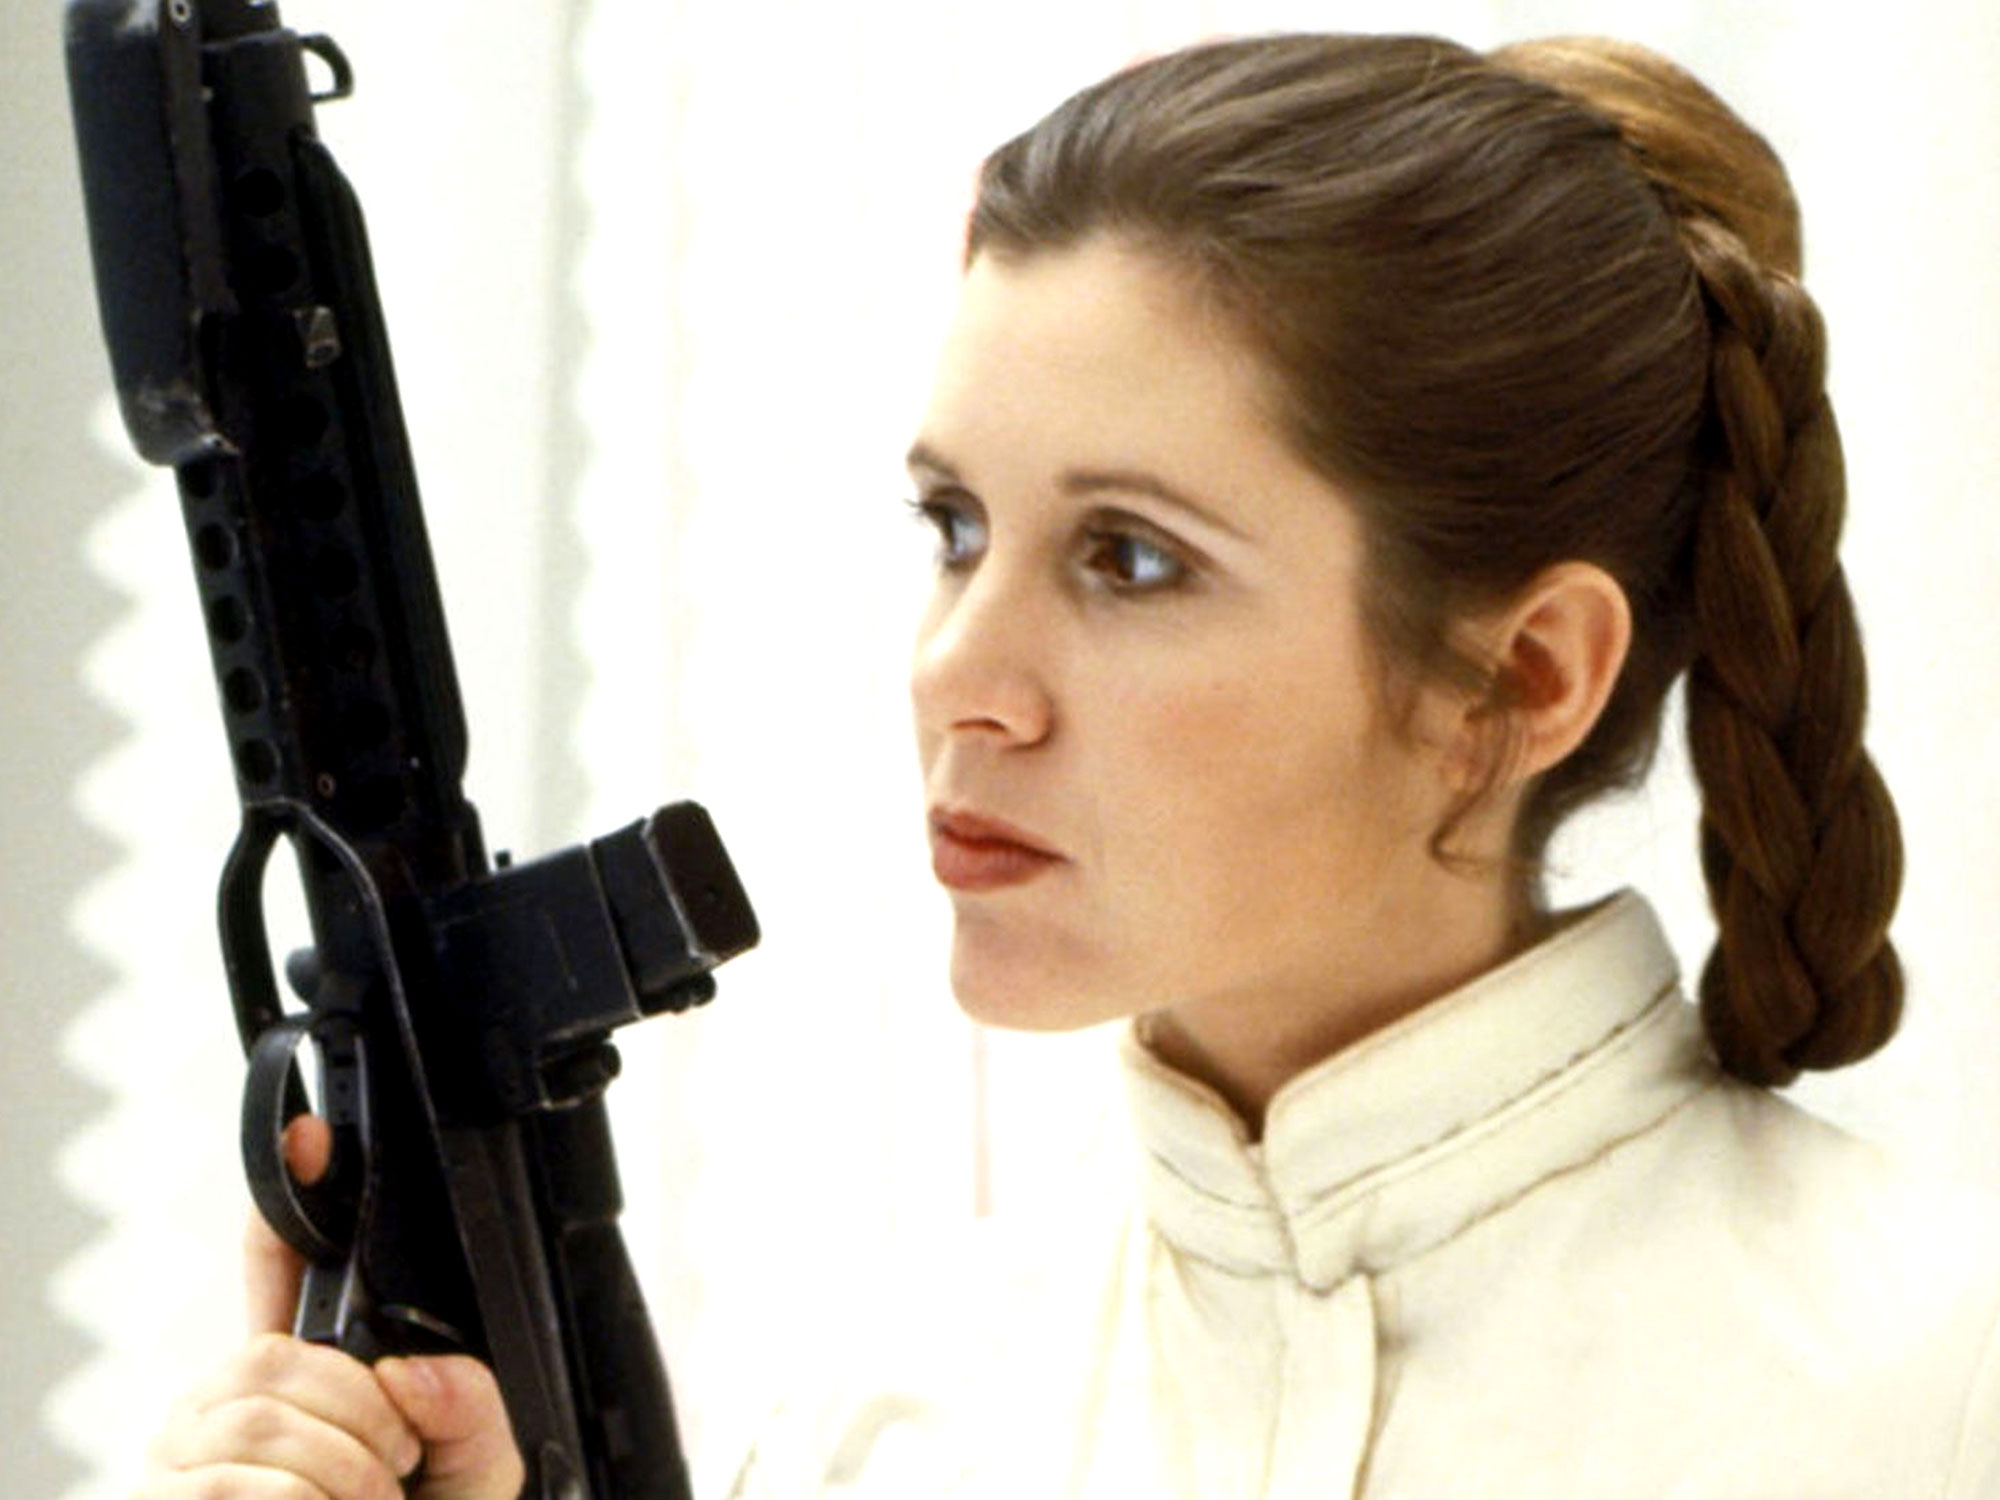 A Princess Leia Movie Is The Only Star Wars Spinoff Wer